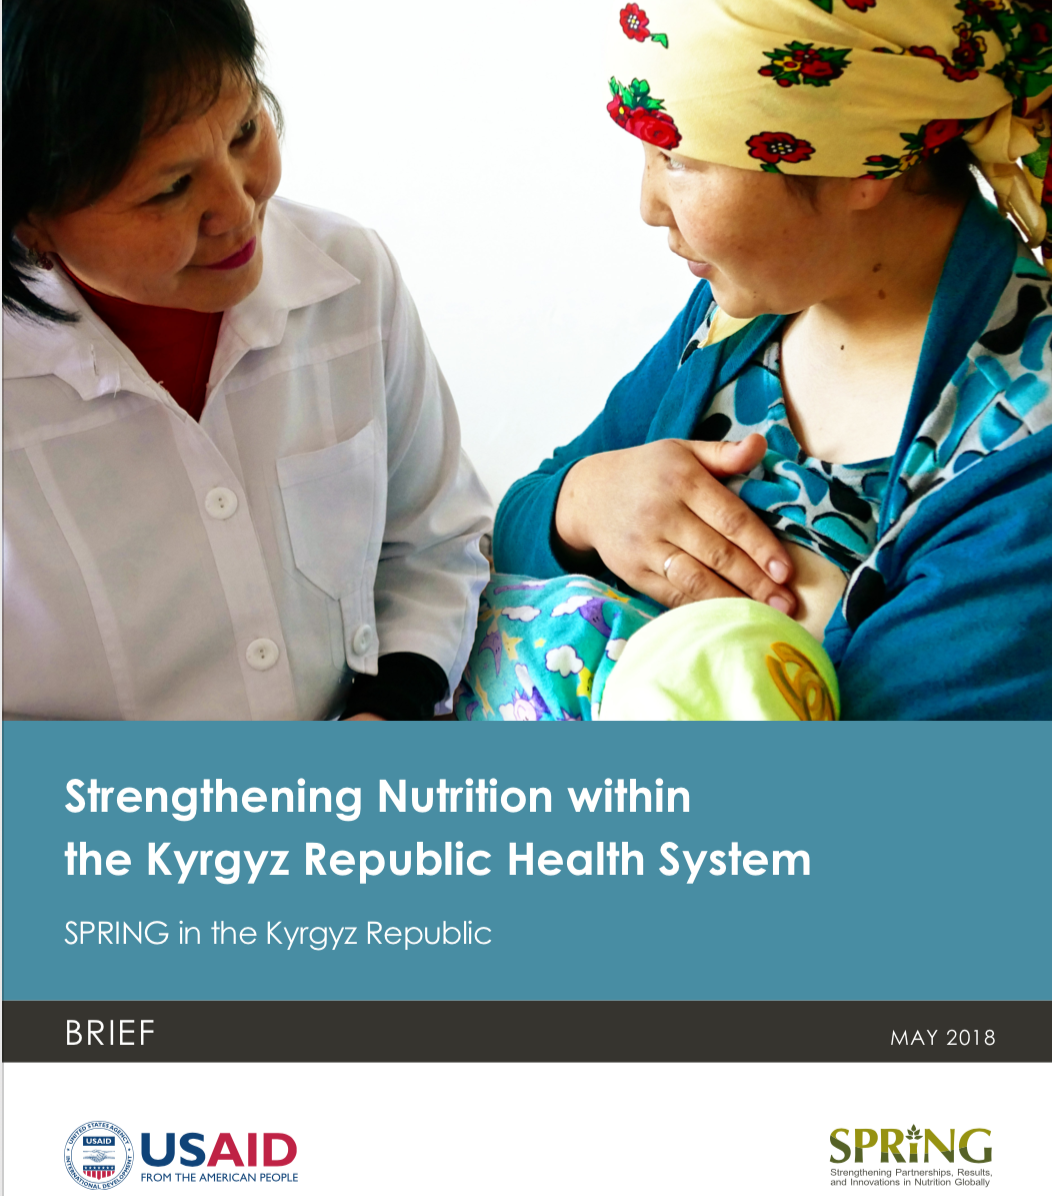 Photo: SPRING_Strengthening Nutrition within the Kyrgyz Republic Health System_5.2018 cover